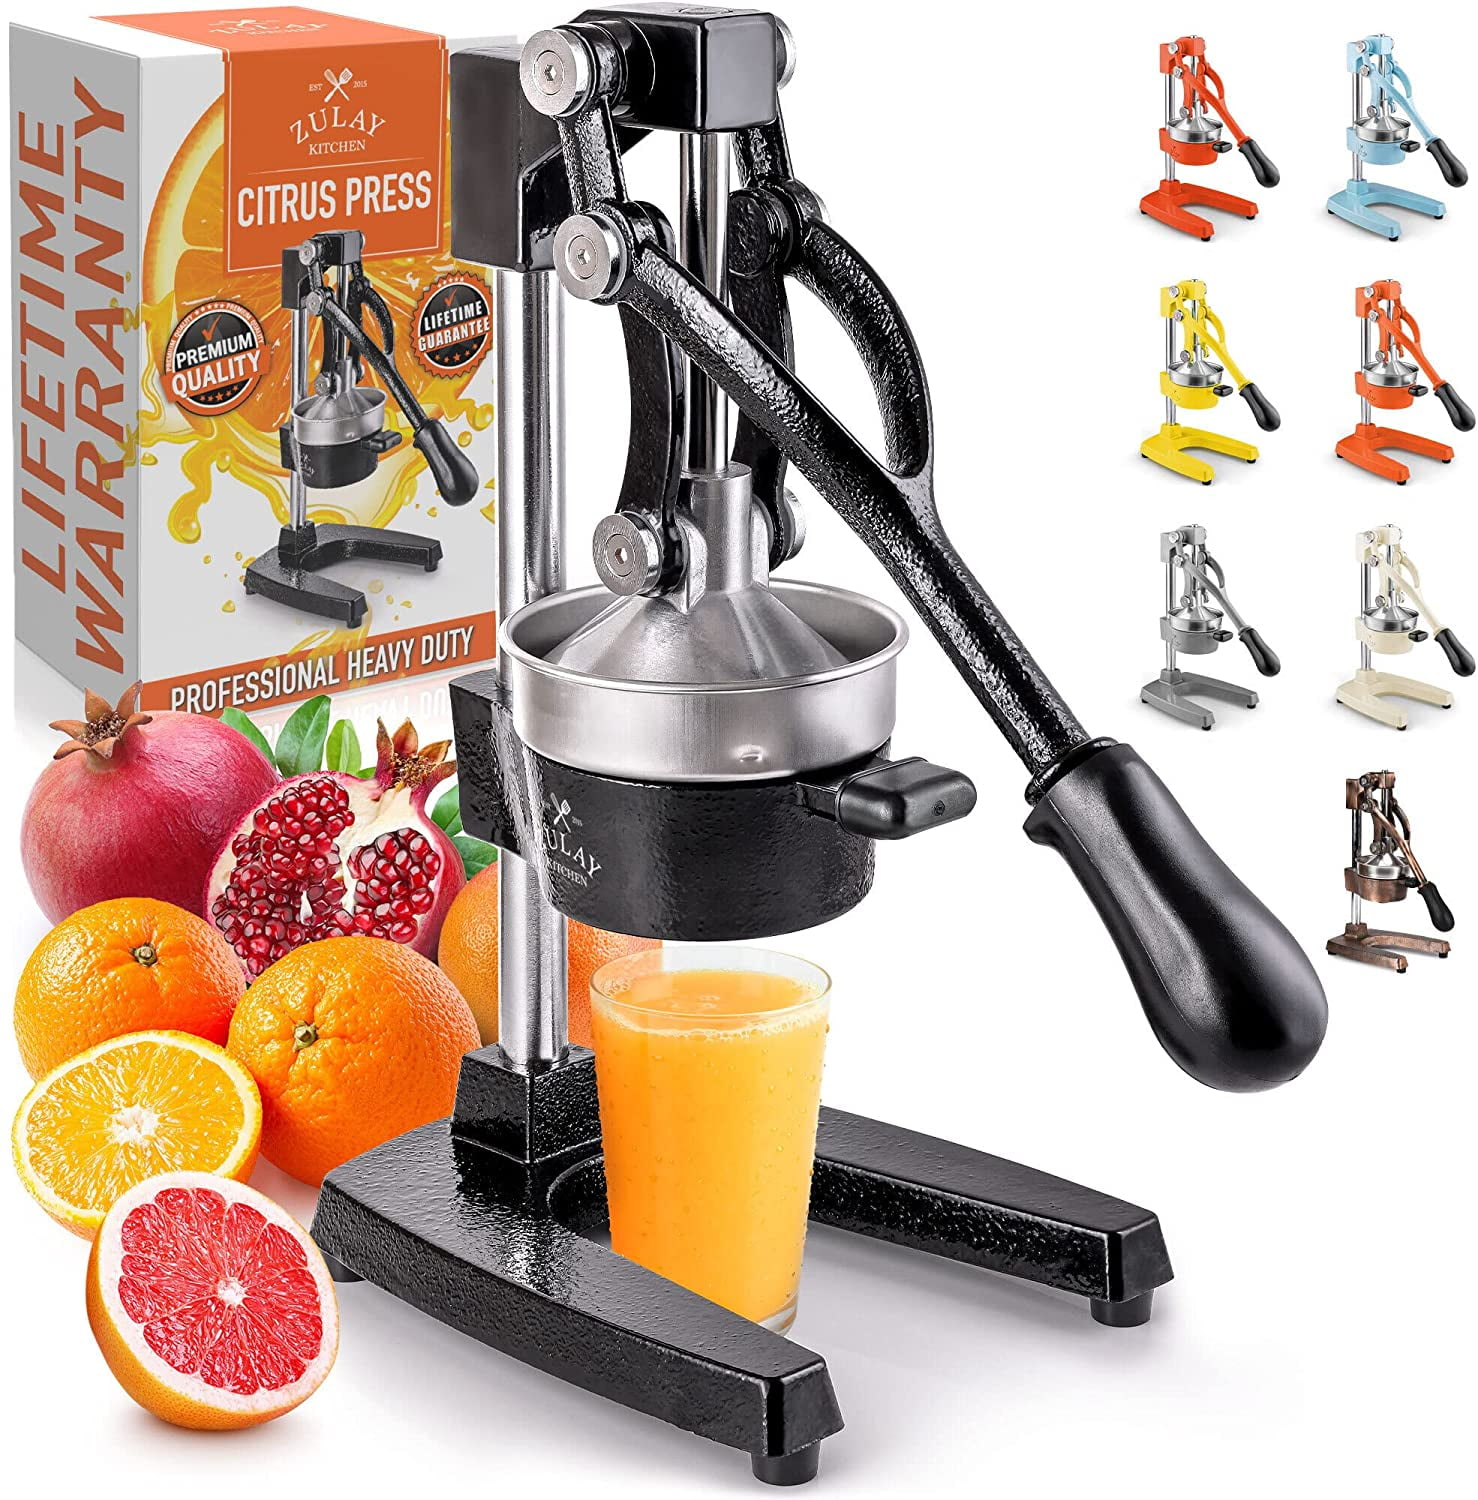 Stainless Steel Manual Juicer Presser Multifunctional And Professional  Heavy Duty Manual Orange Squeezer Press For Kitchen - AliExpress